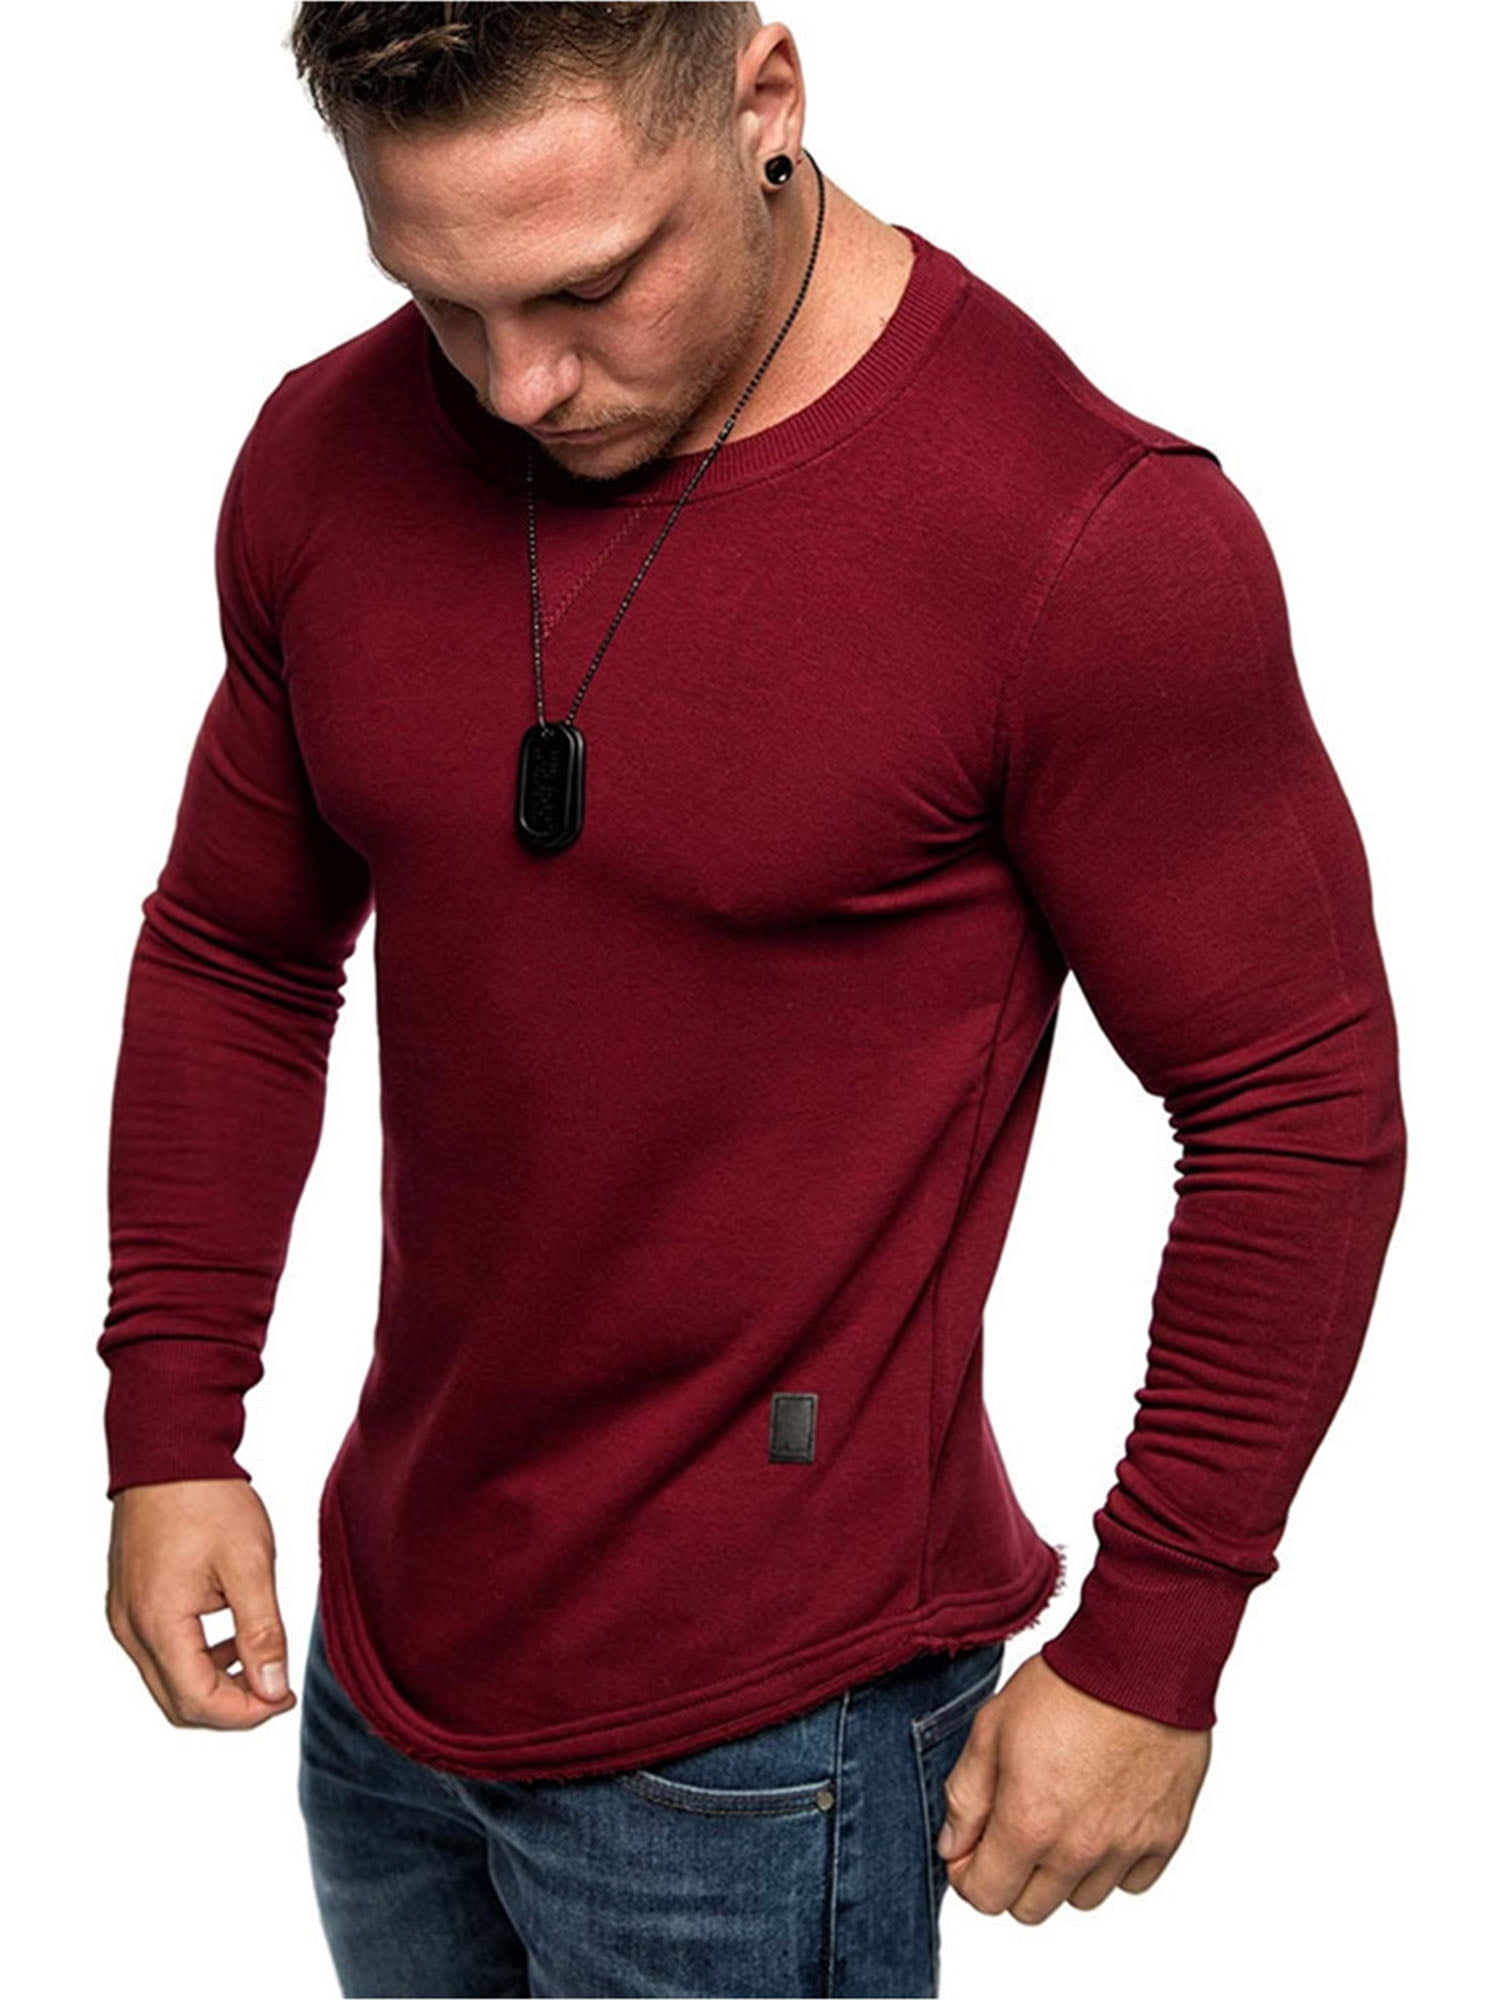 Slim Fit Long Sleeve Casual T-Shirts for Mens Sport Gym Muscle Fitness ...